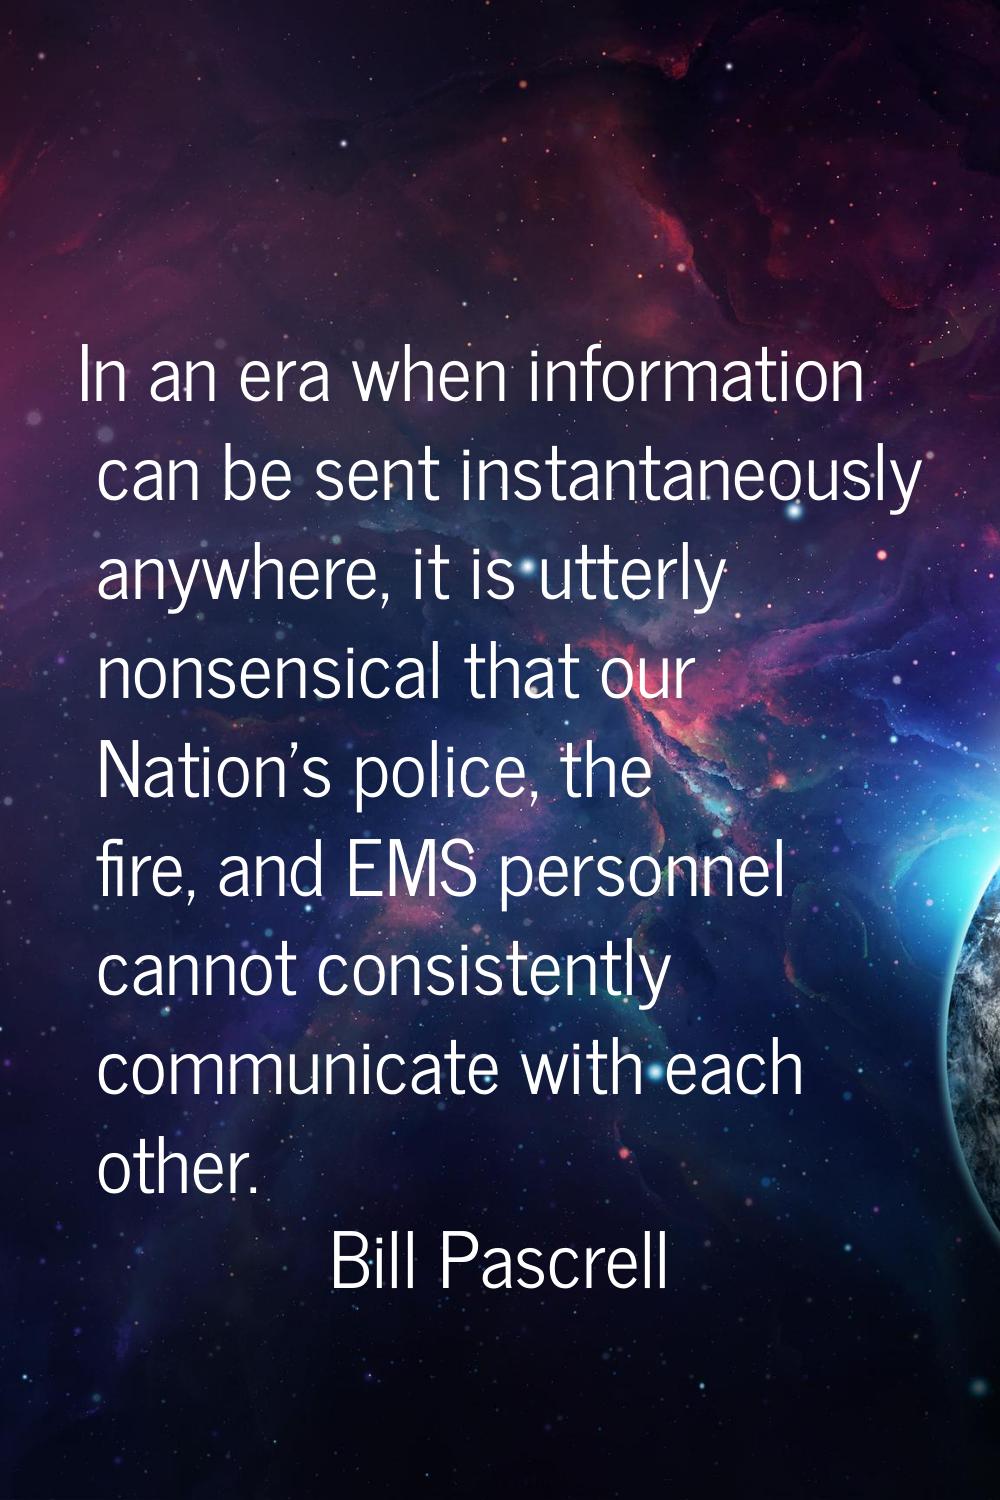 In an era when information can be sent instantaneously anywhere, it is utterly nonsensical that our